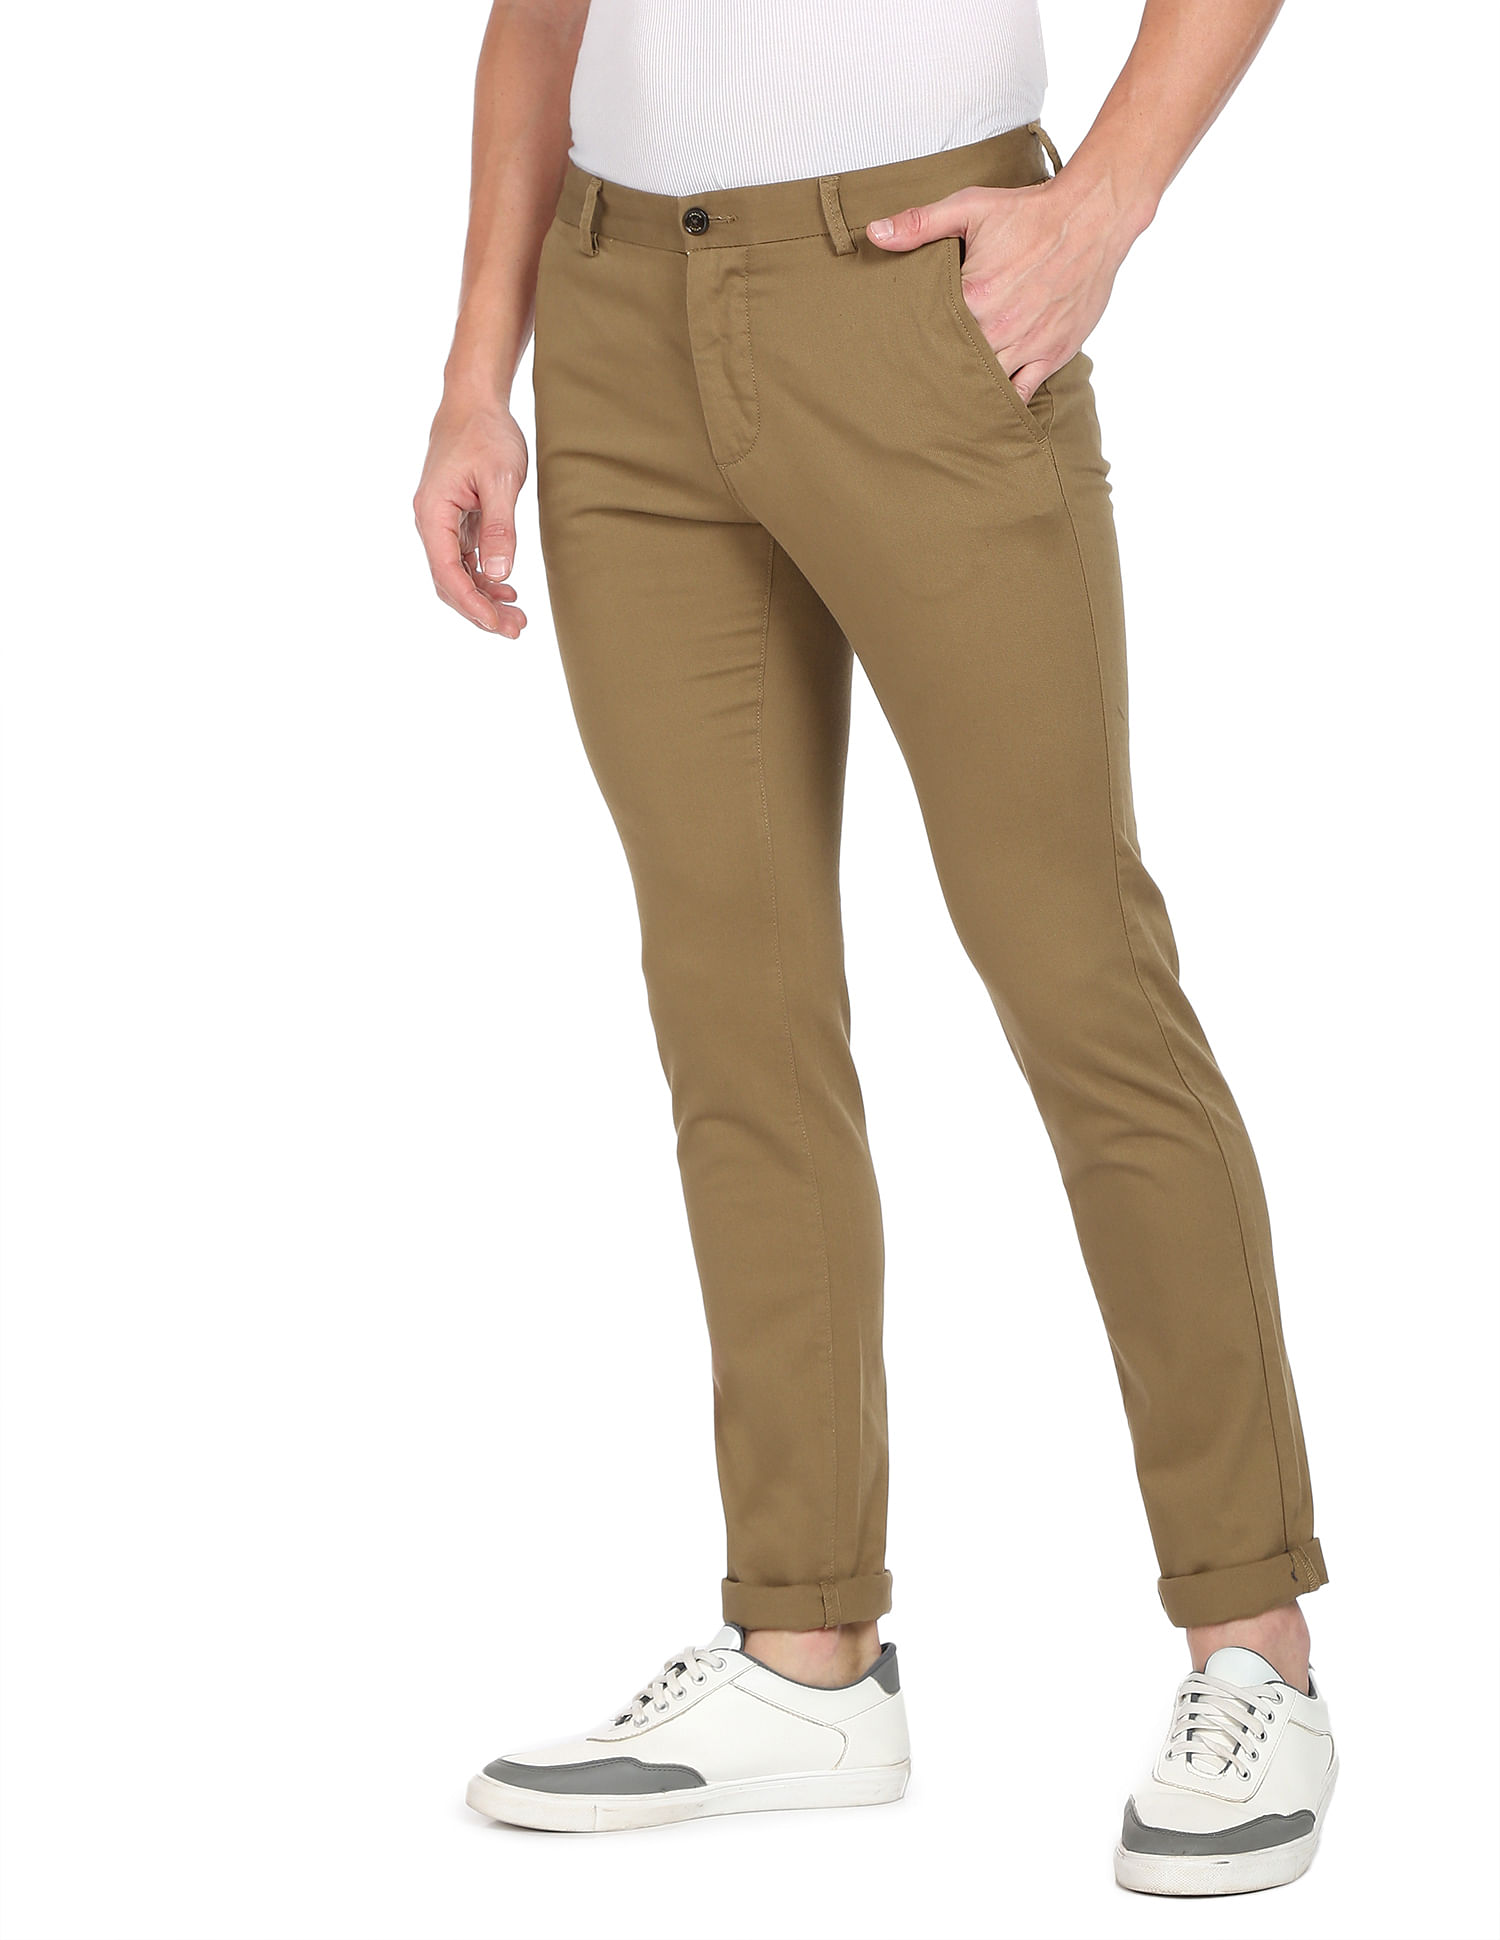 Arrow Newyork Brown Color Slim Fit Flat Front Trousers